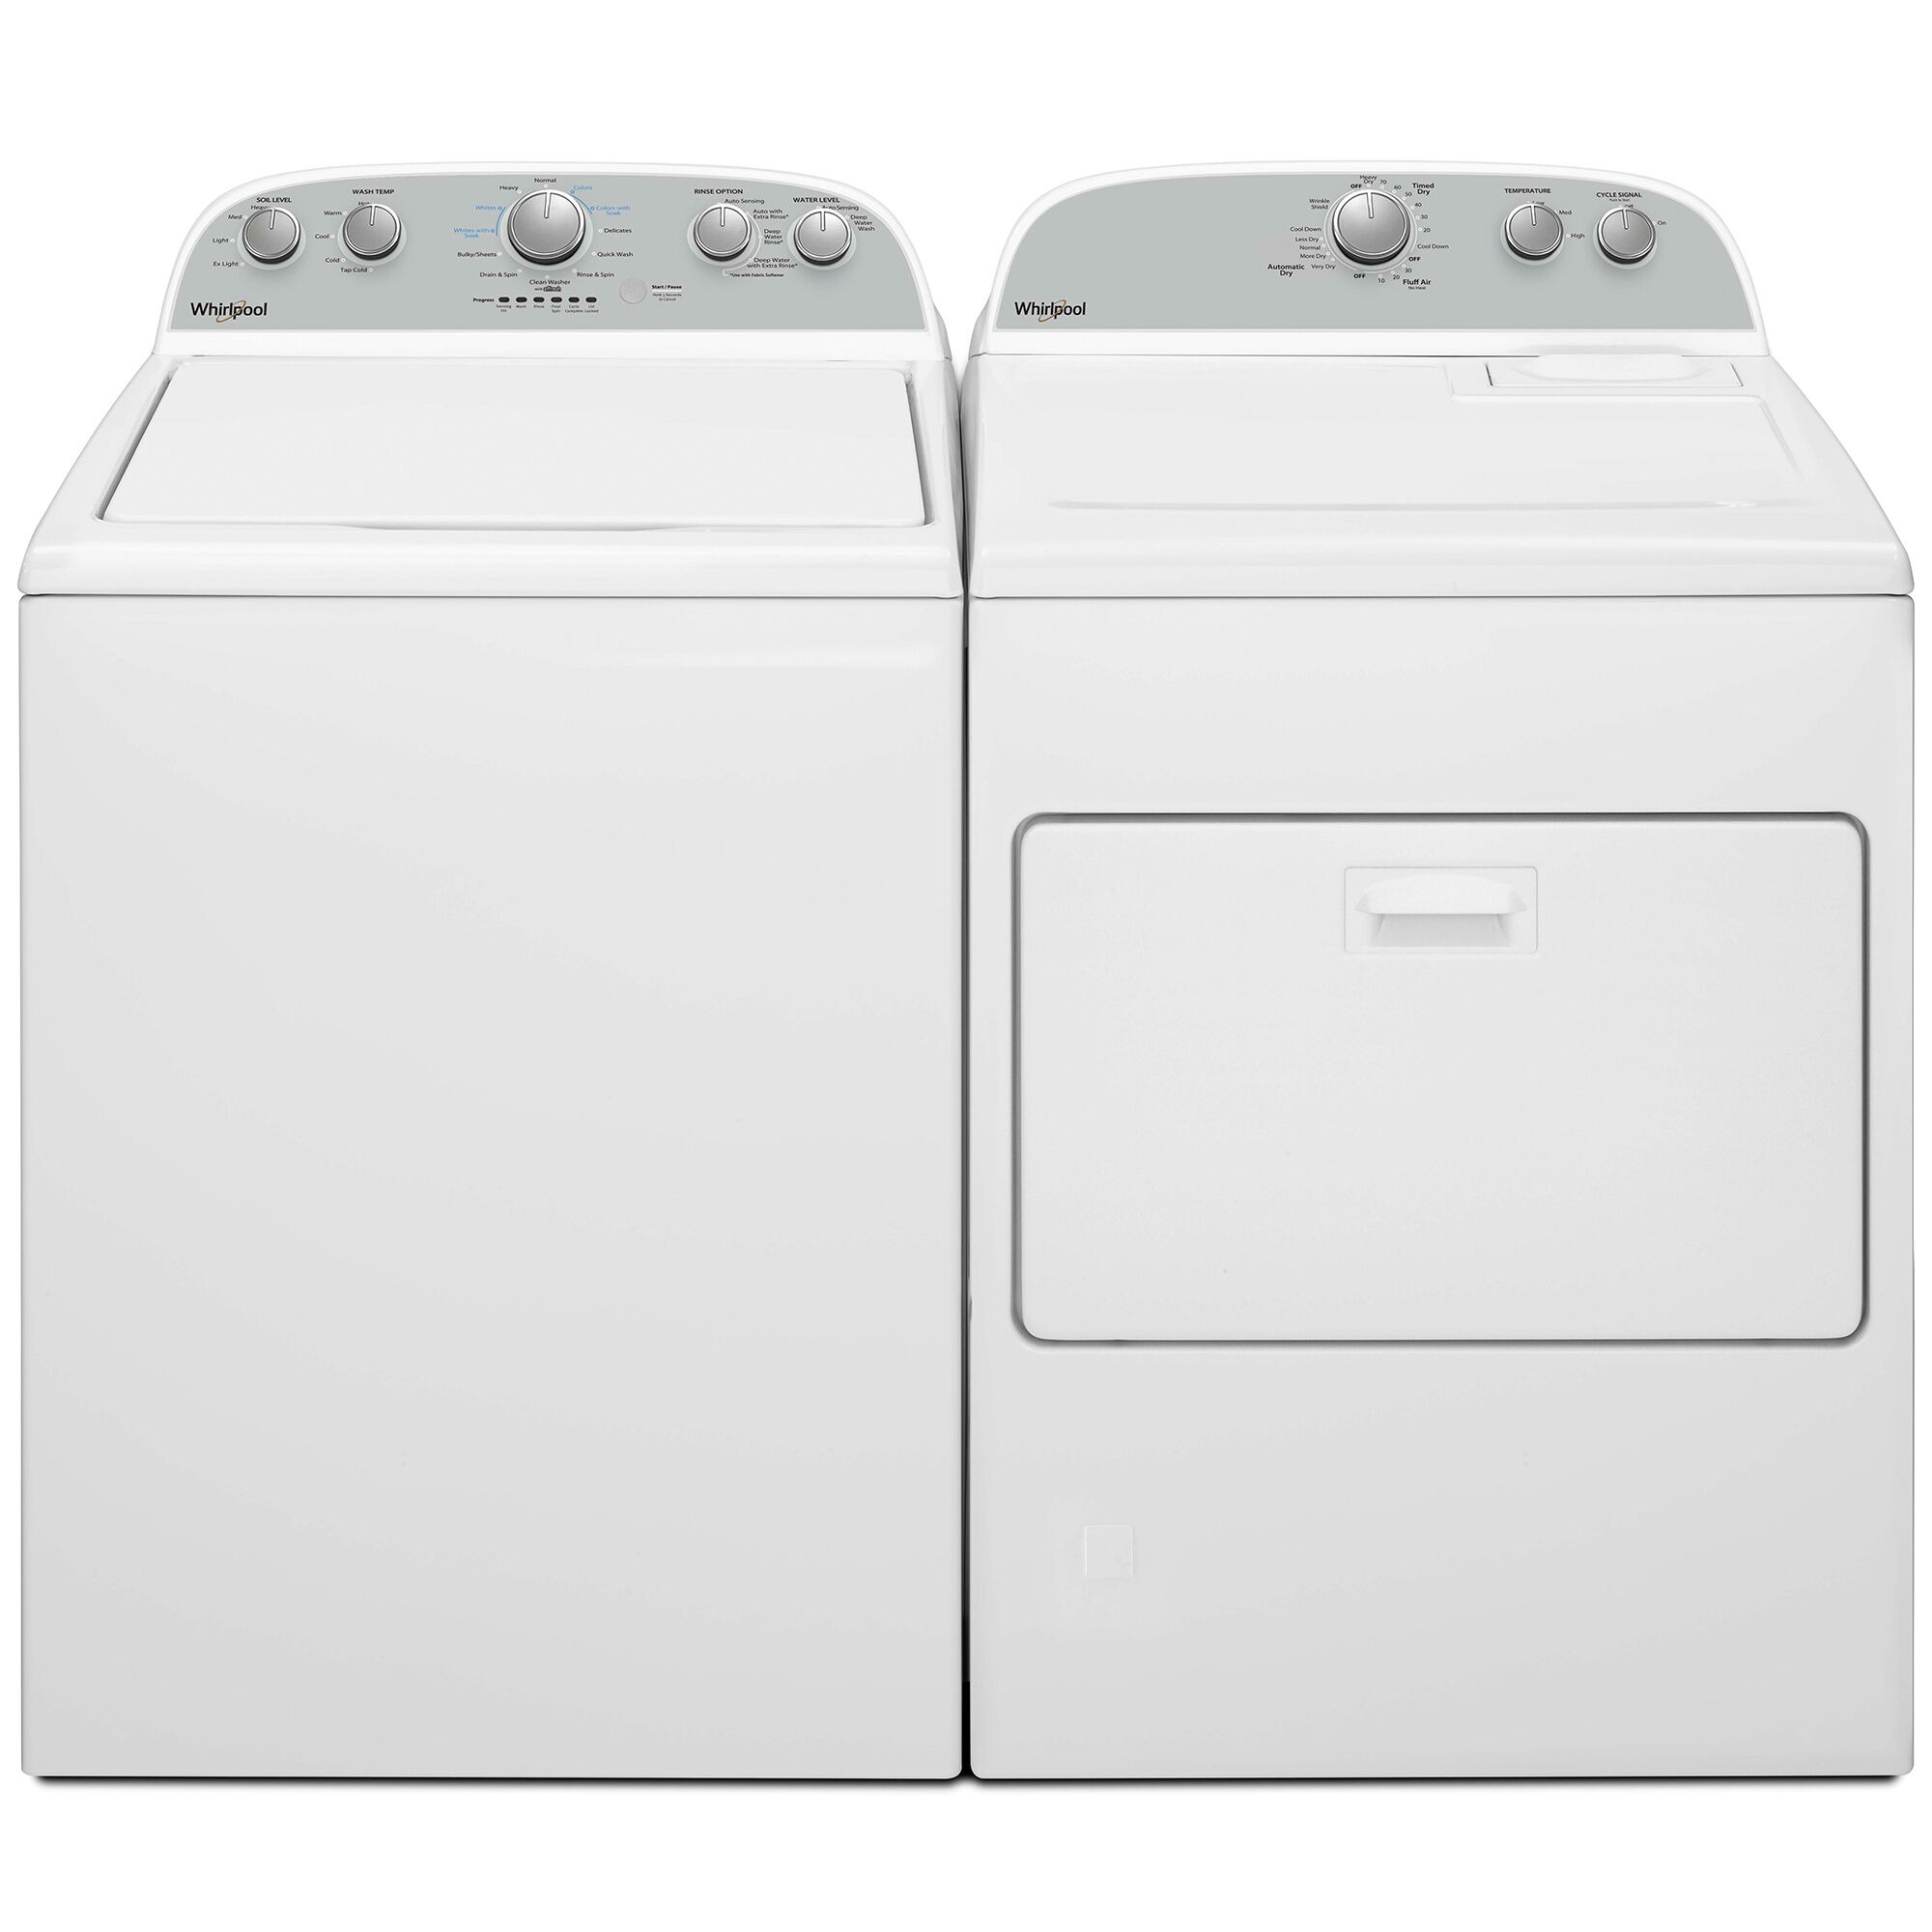 Whirlpool 27.5 in. 3.8 cu. ft. Top Load Washer with Soil Level Selection -  White